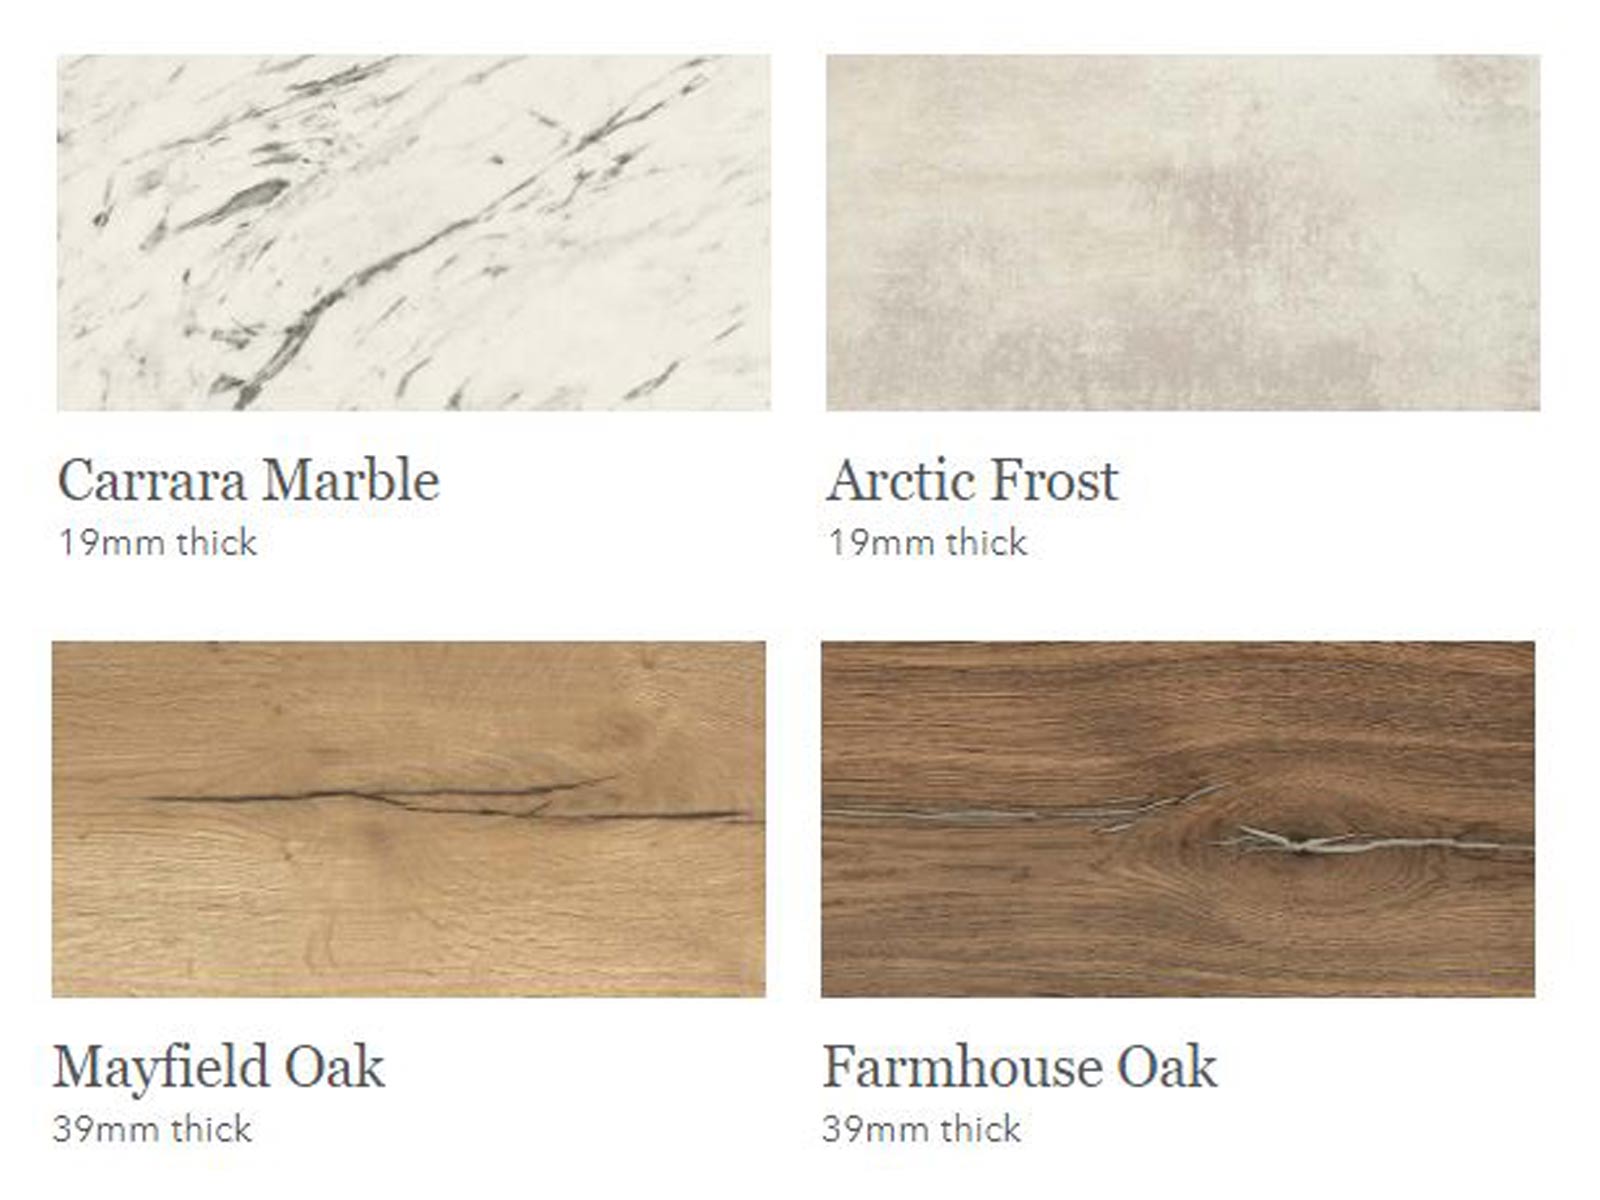 Kitchen counter colours and finishes including marble and wood countertops